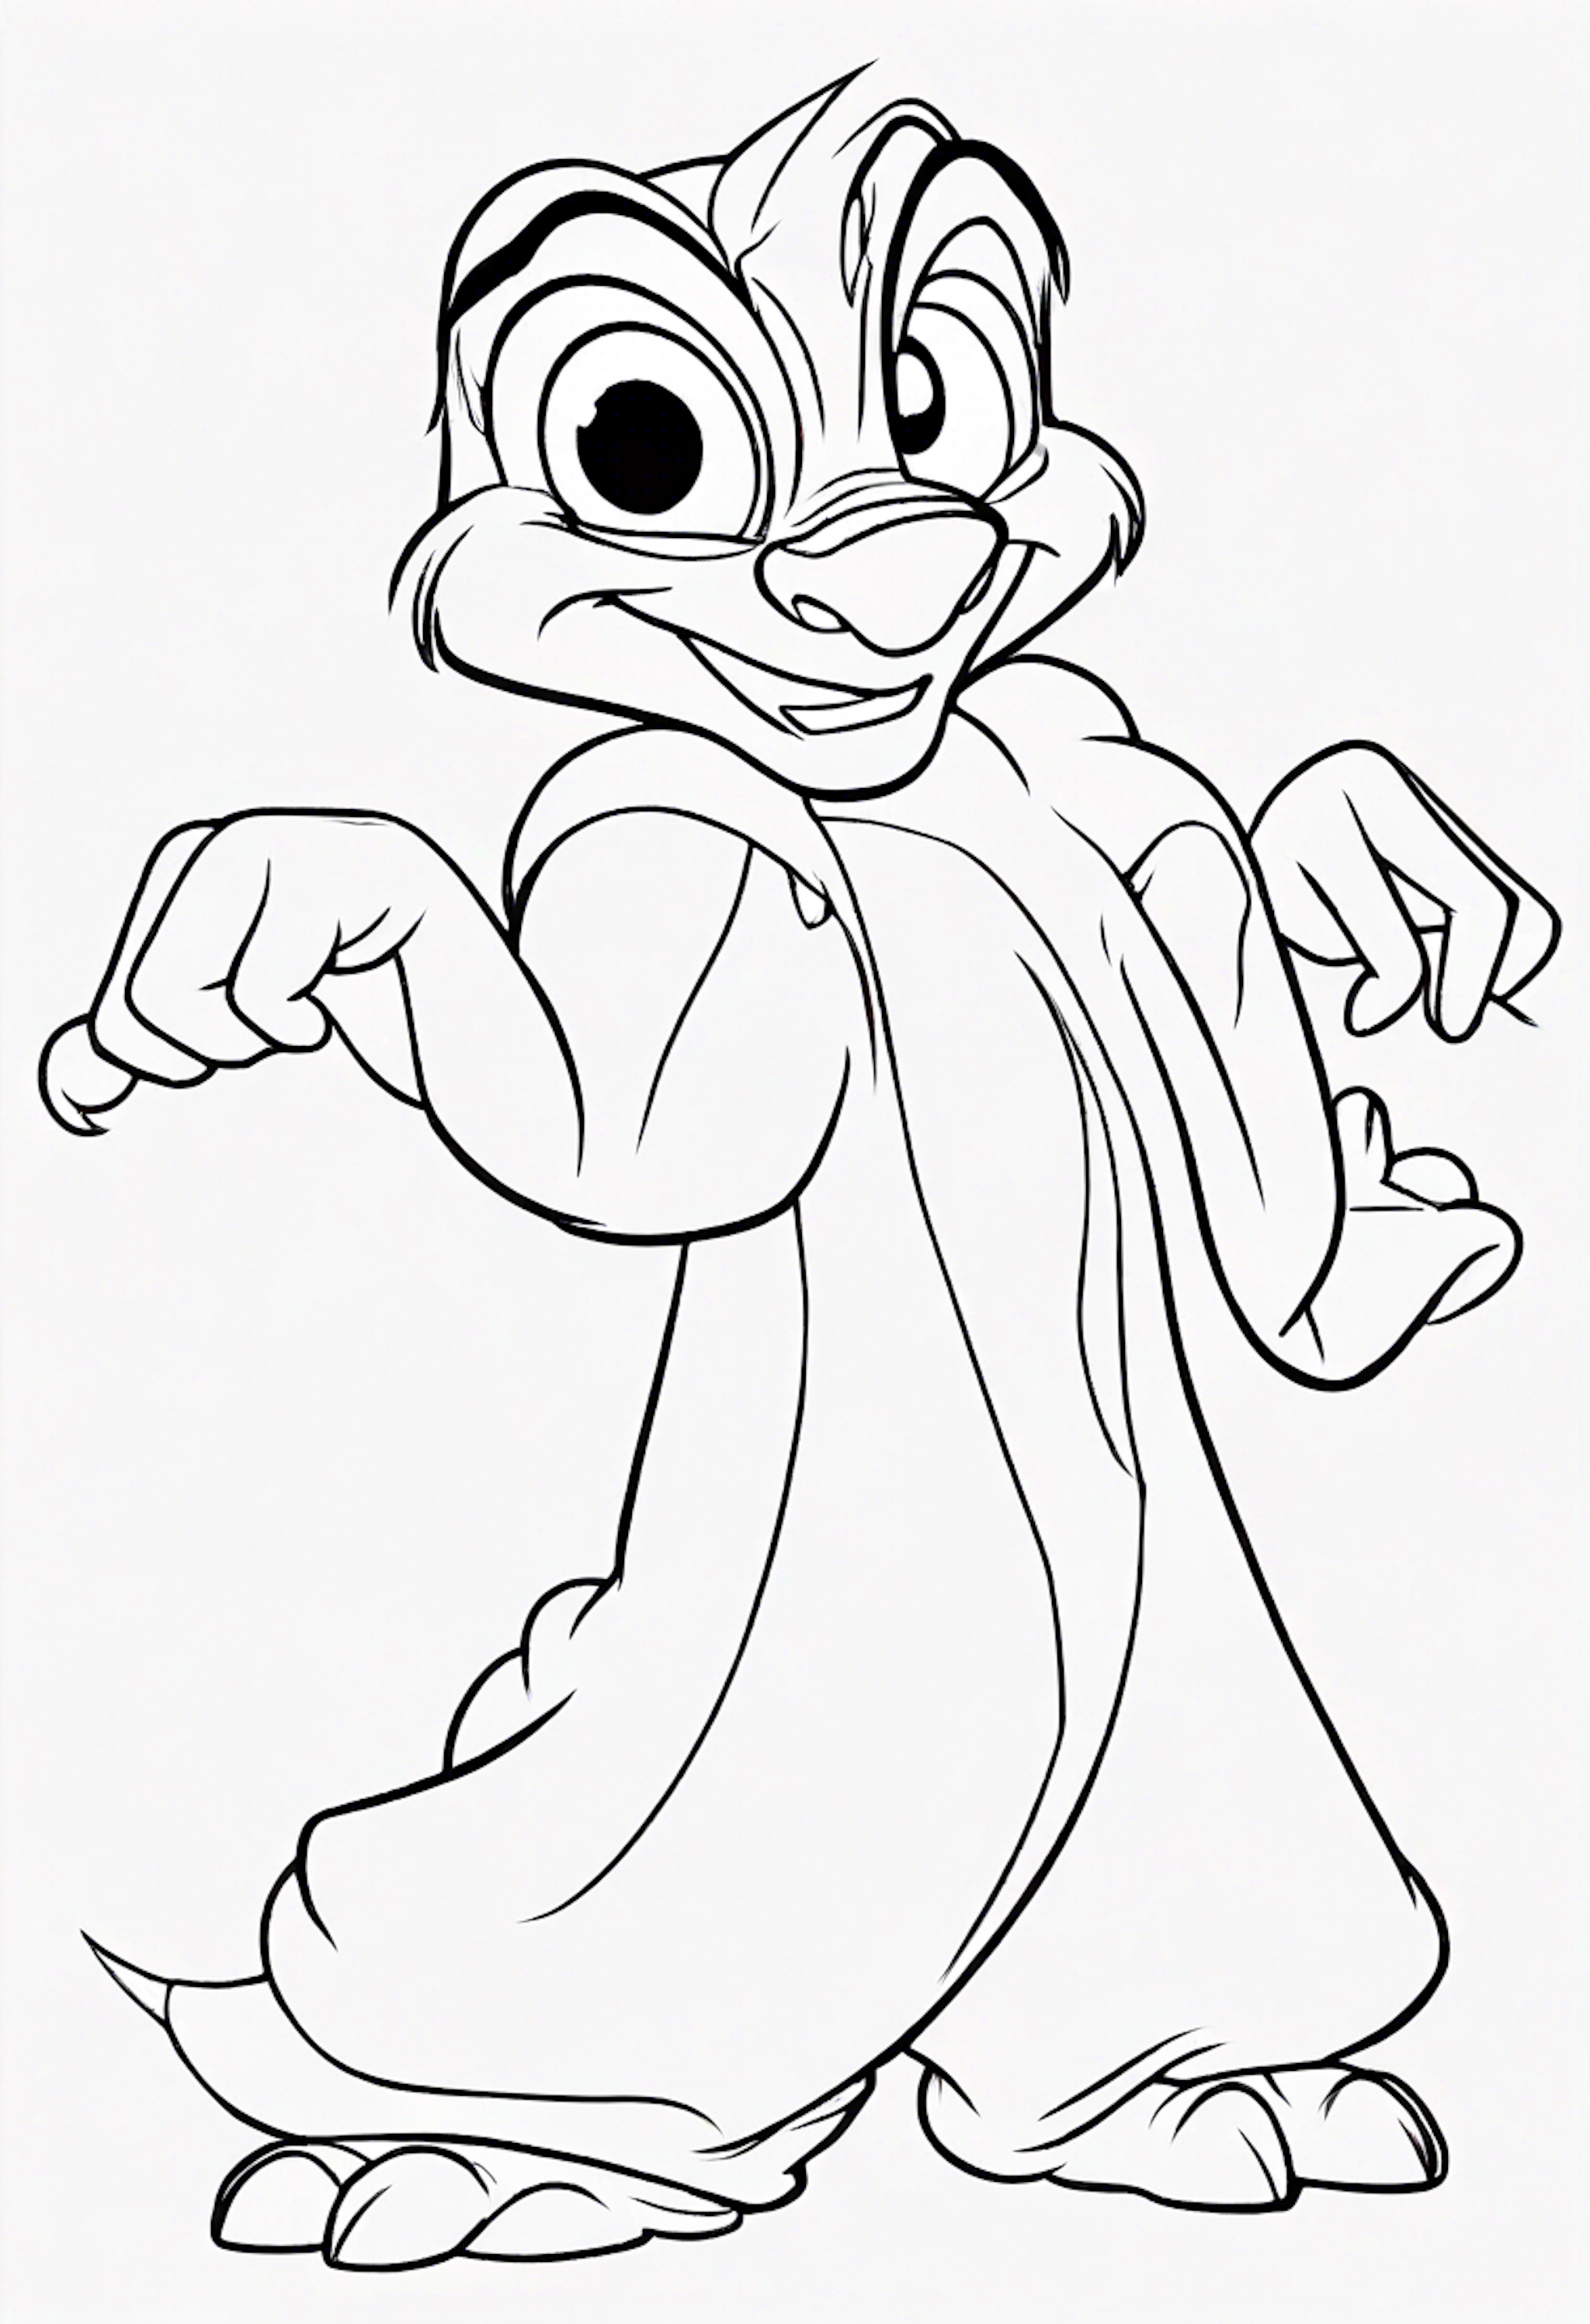 A coloring page for 1 Disney coloring pages